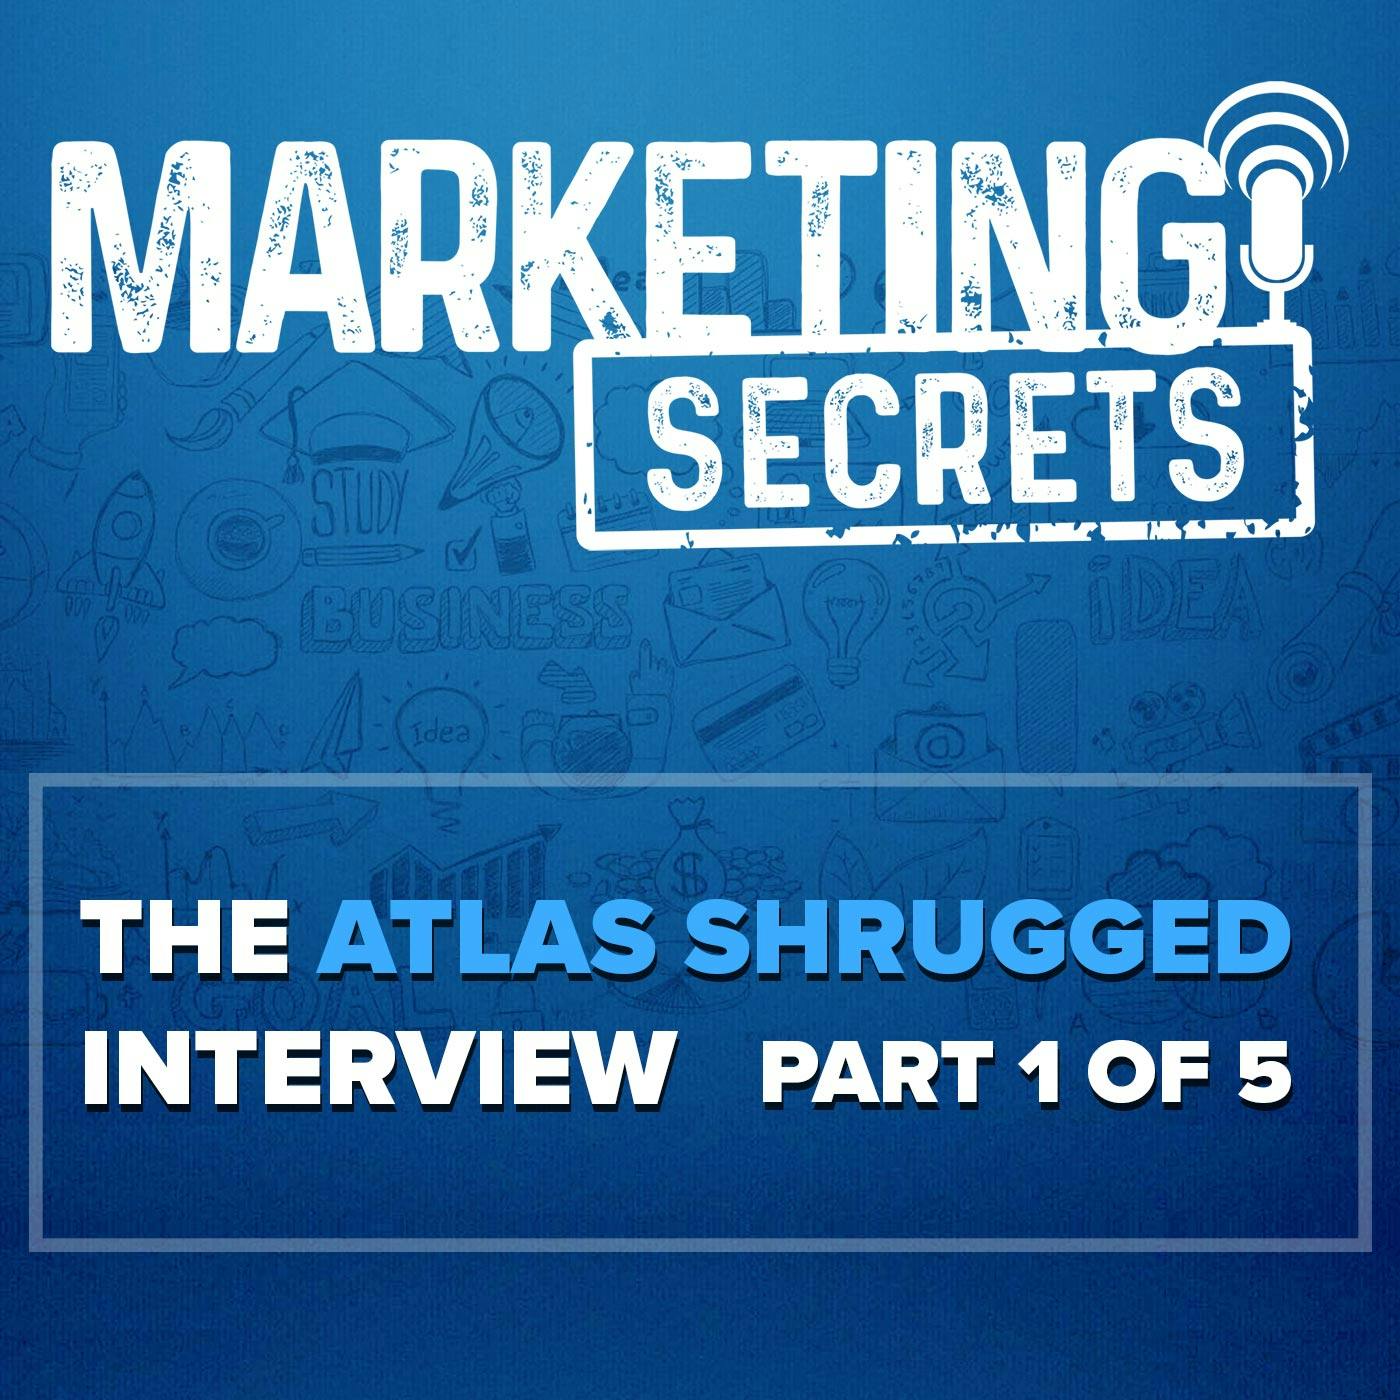 The Atlas Shrugged Interview - Part 1 of 5